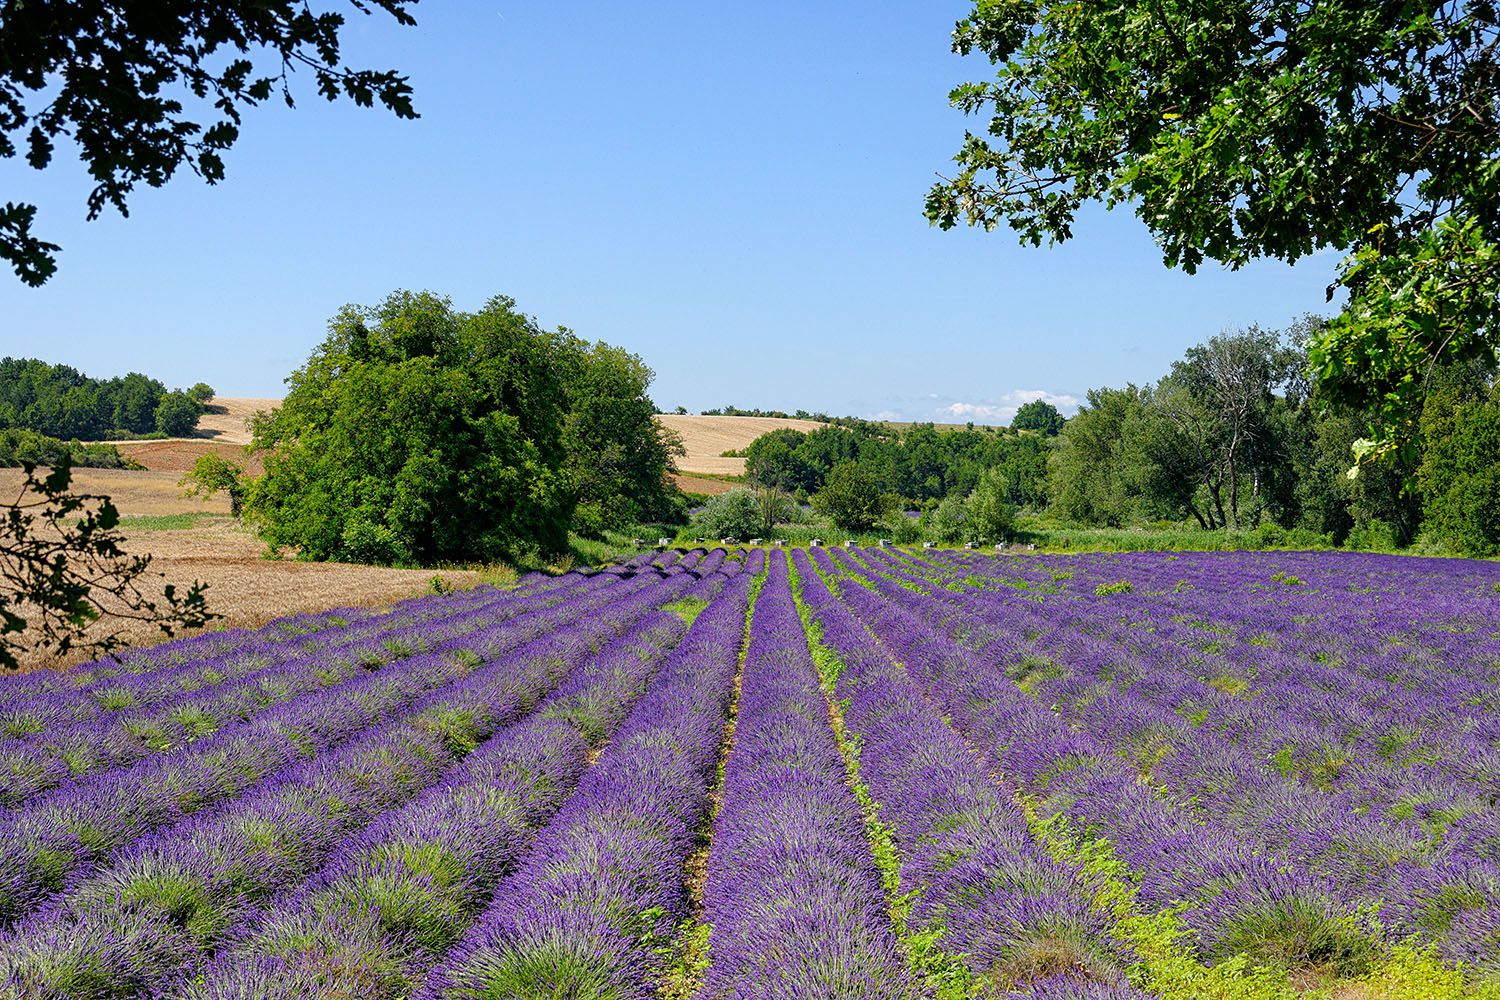 Strangely, it almost looks more natural when the lavender is grown in rows.